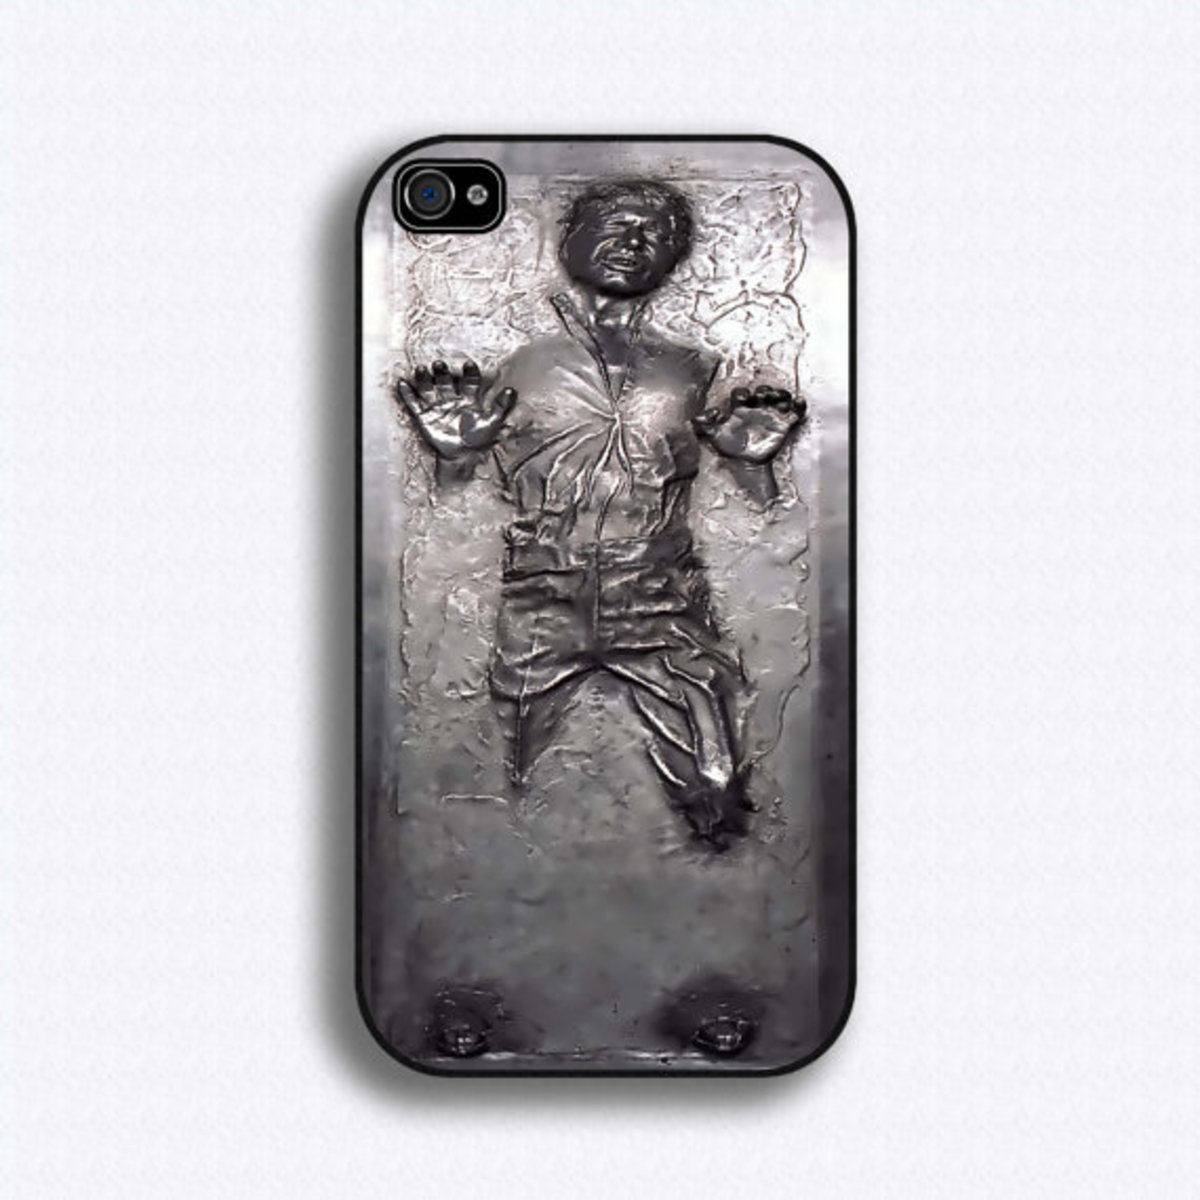 han solo in carbonite iphone case